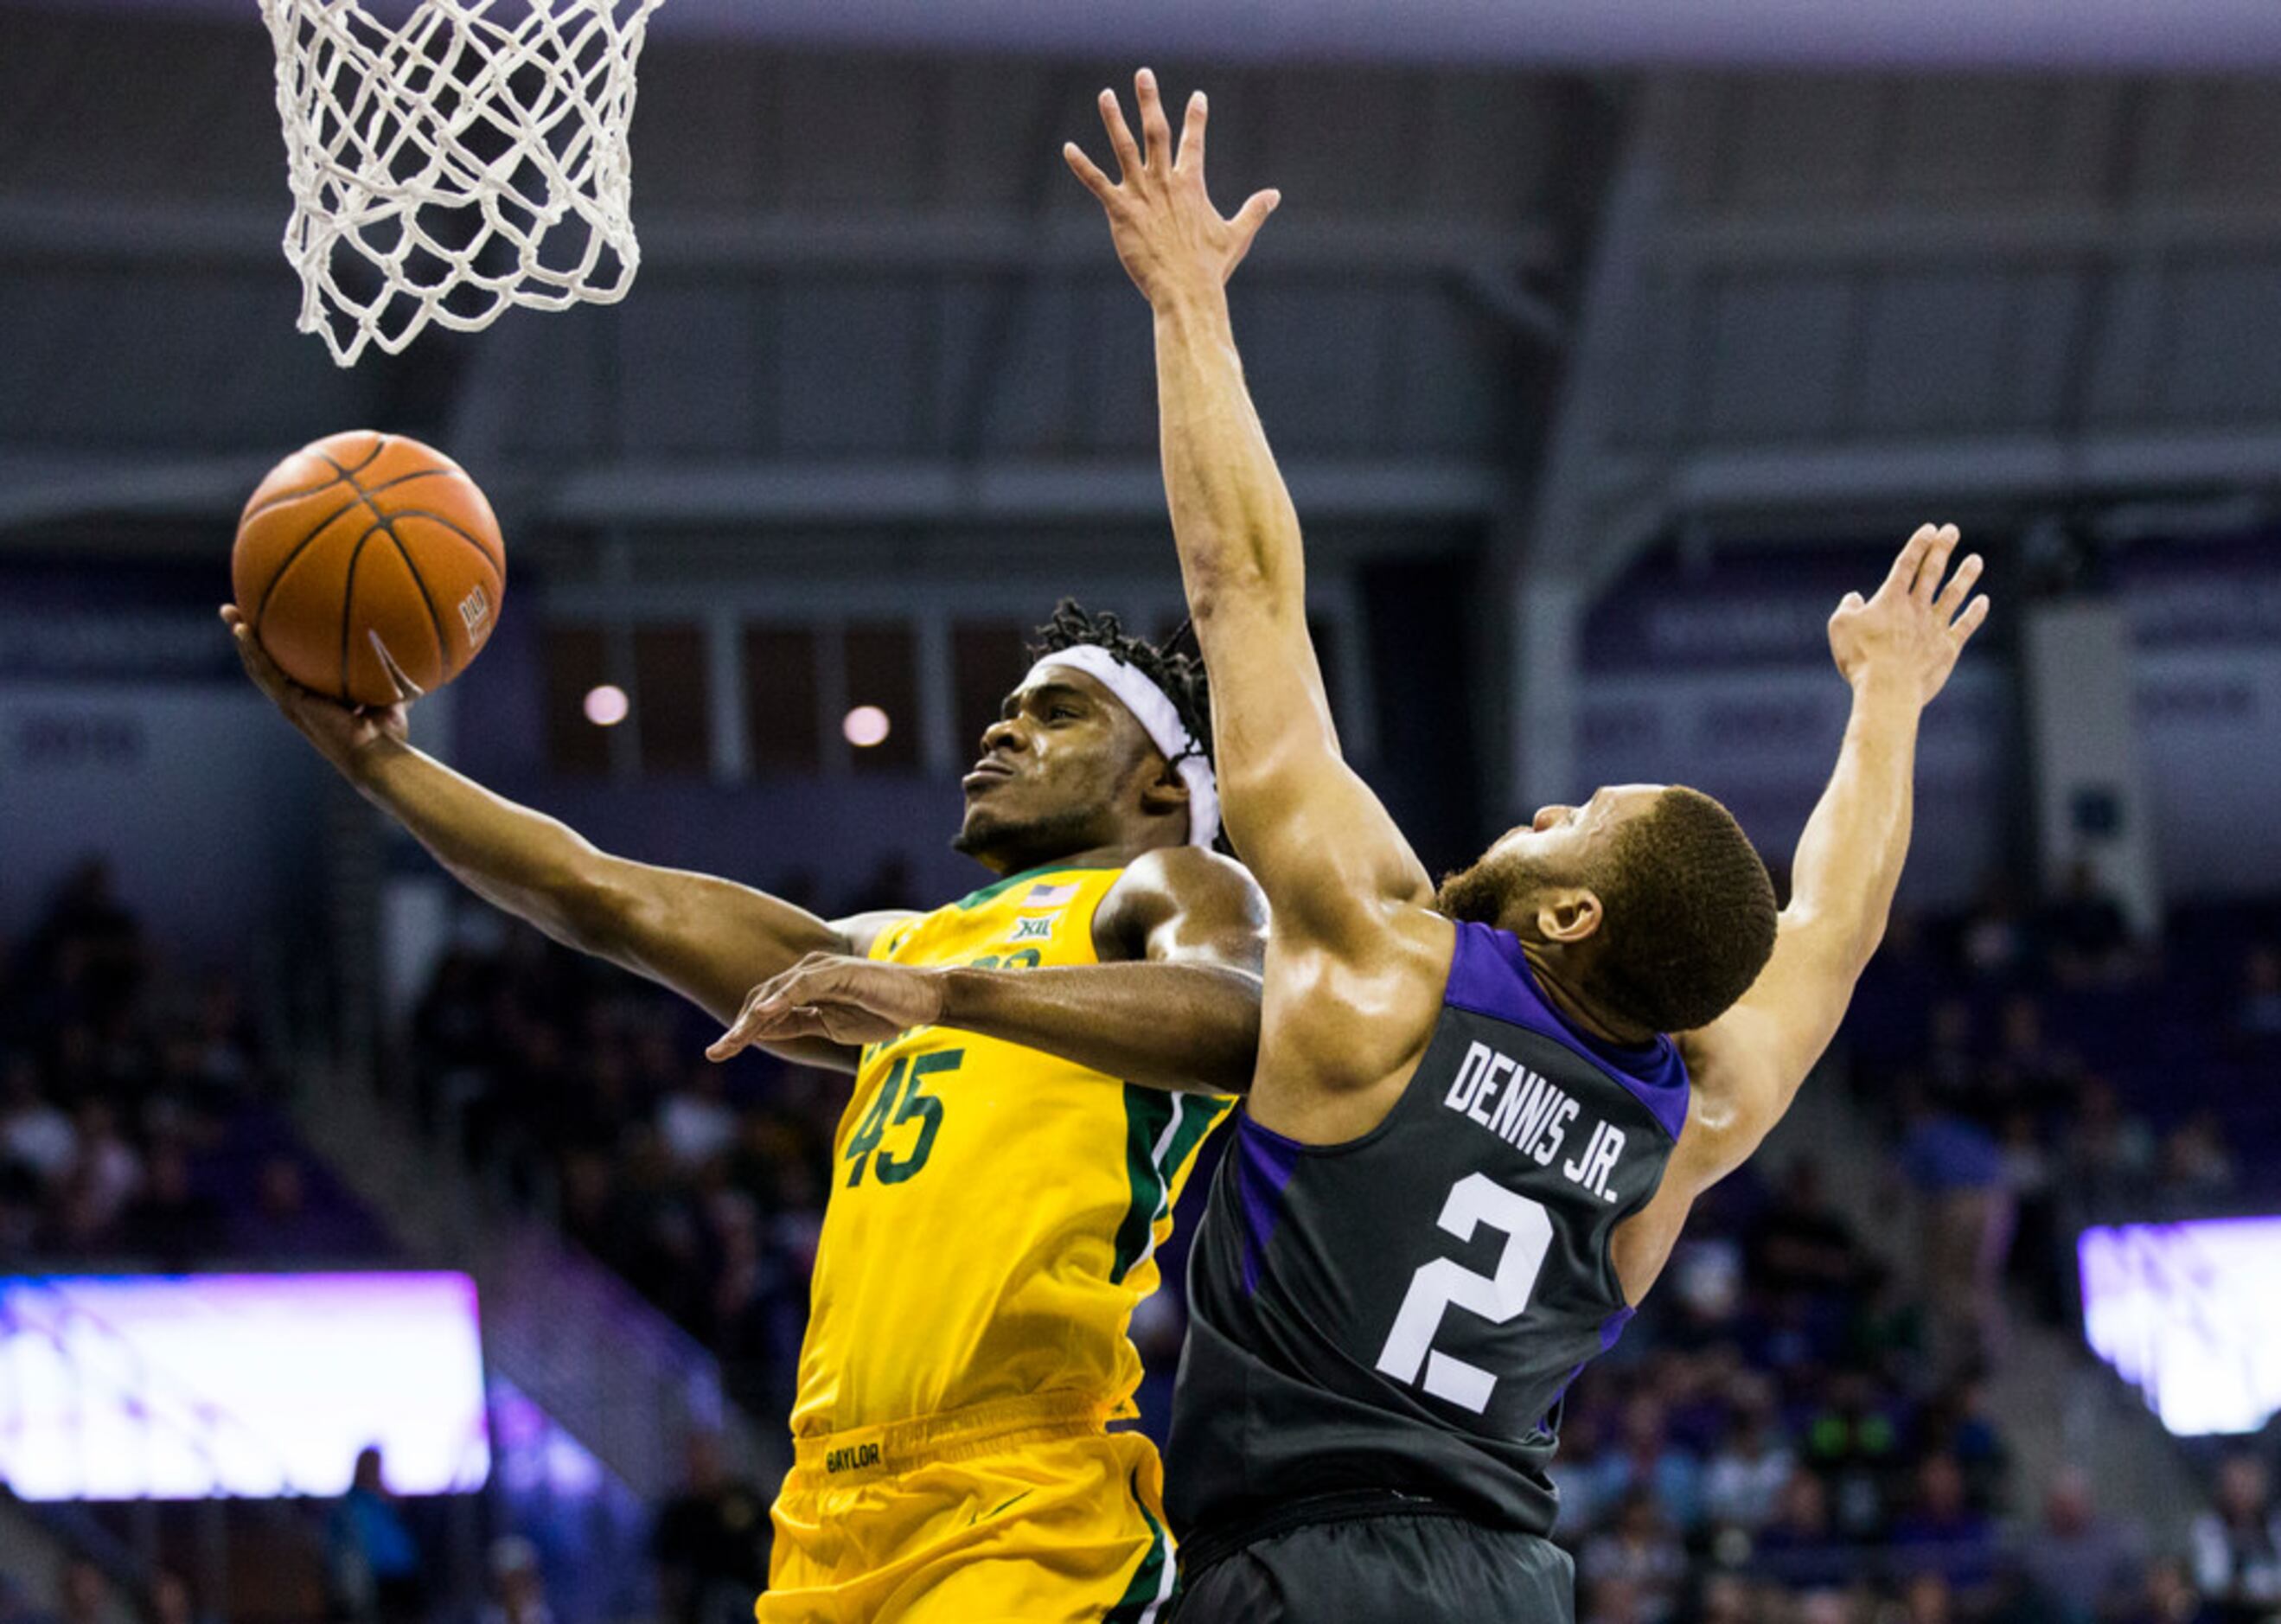 Baylor Bears guard Davion Mitchell (45) goes up for a shot ahead of TCU Horned Frogs guard...